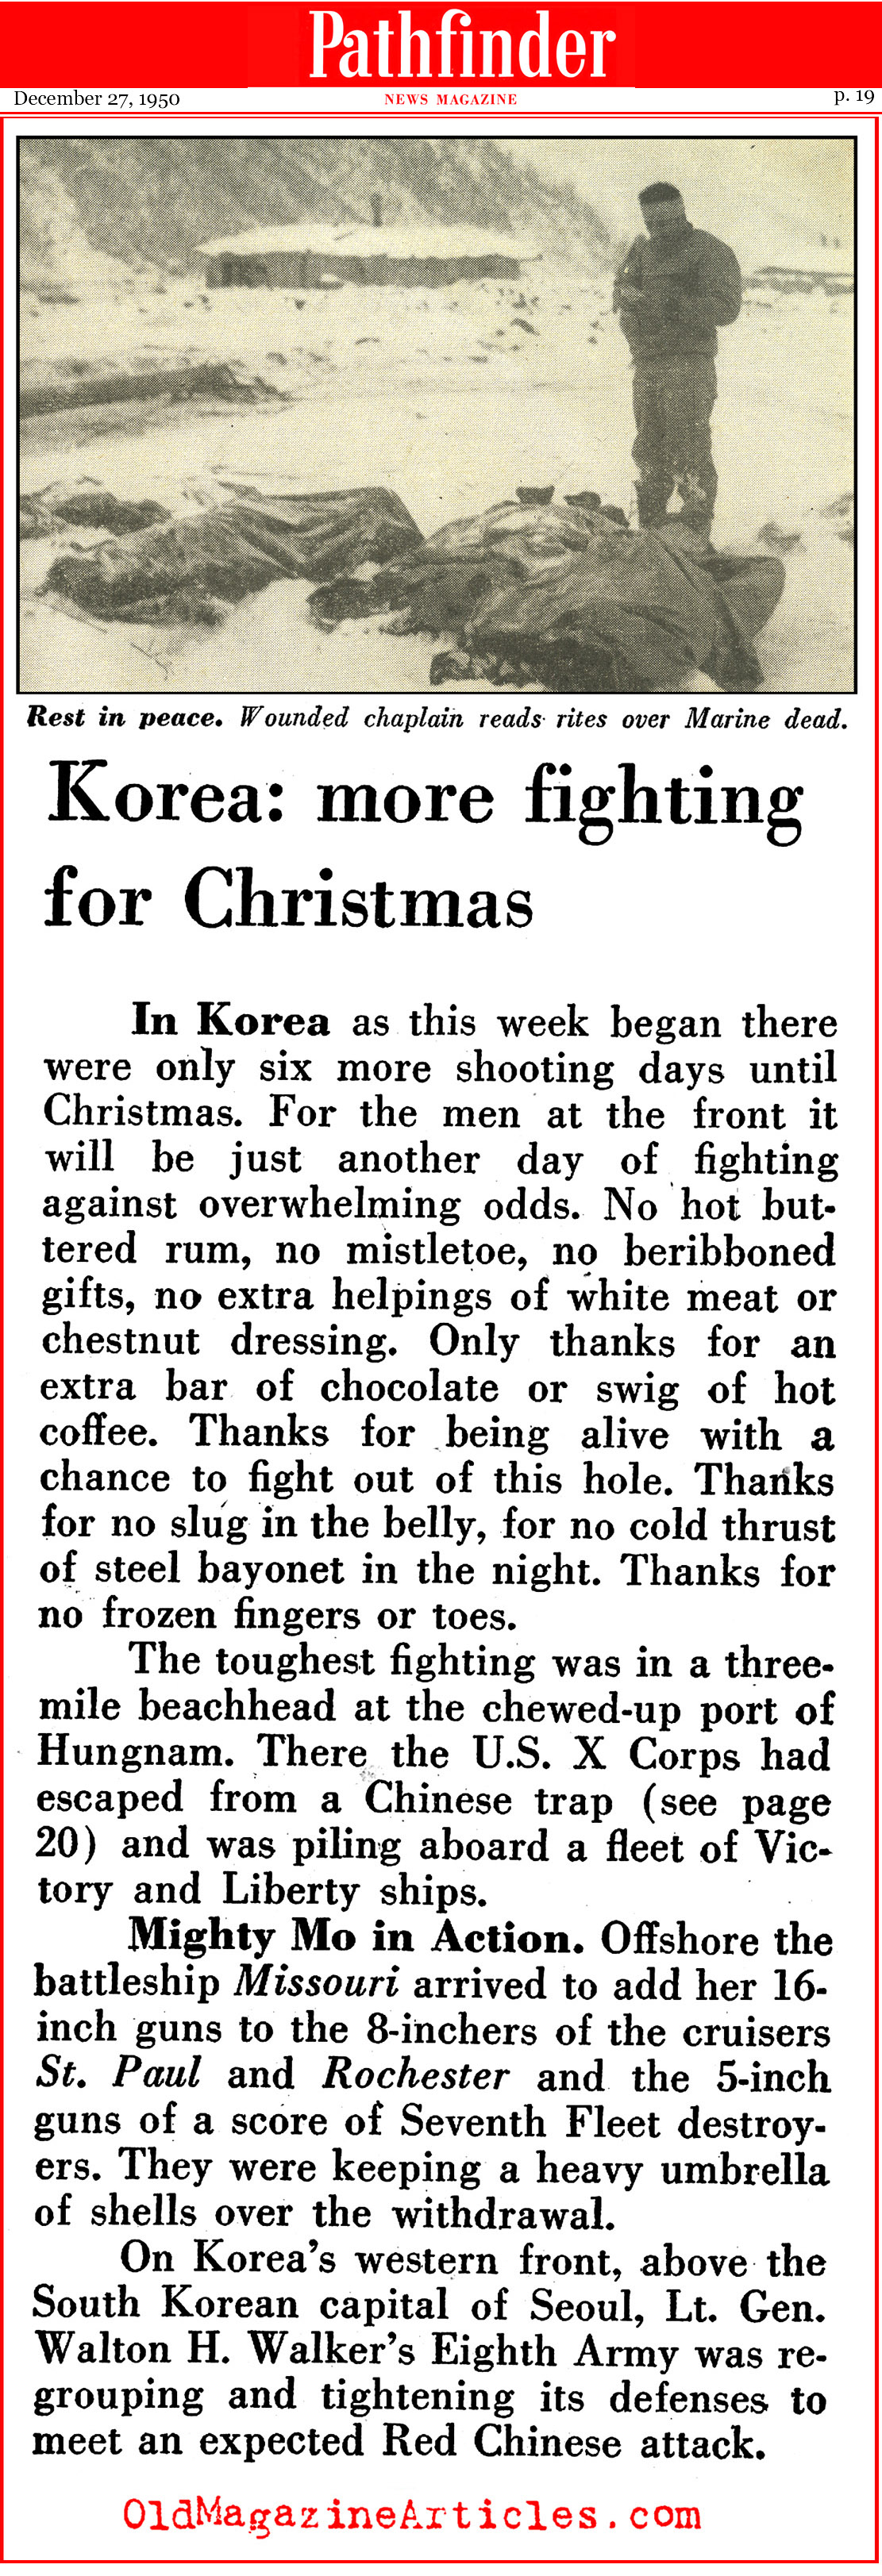 More Fighting for Christmas (Pathfinder Magazine, 1950)